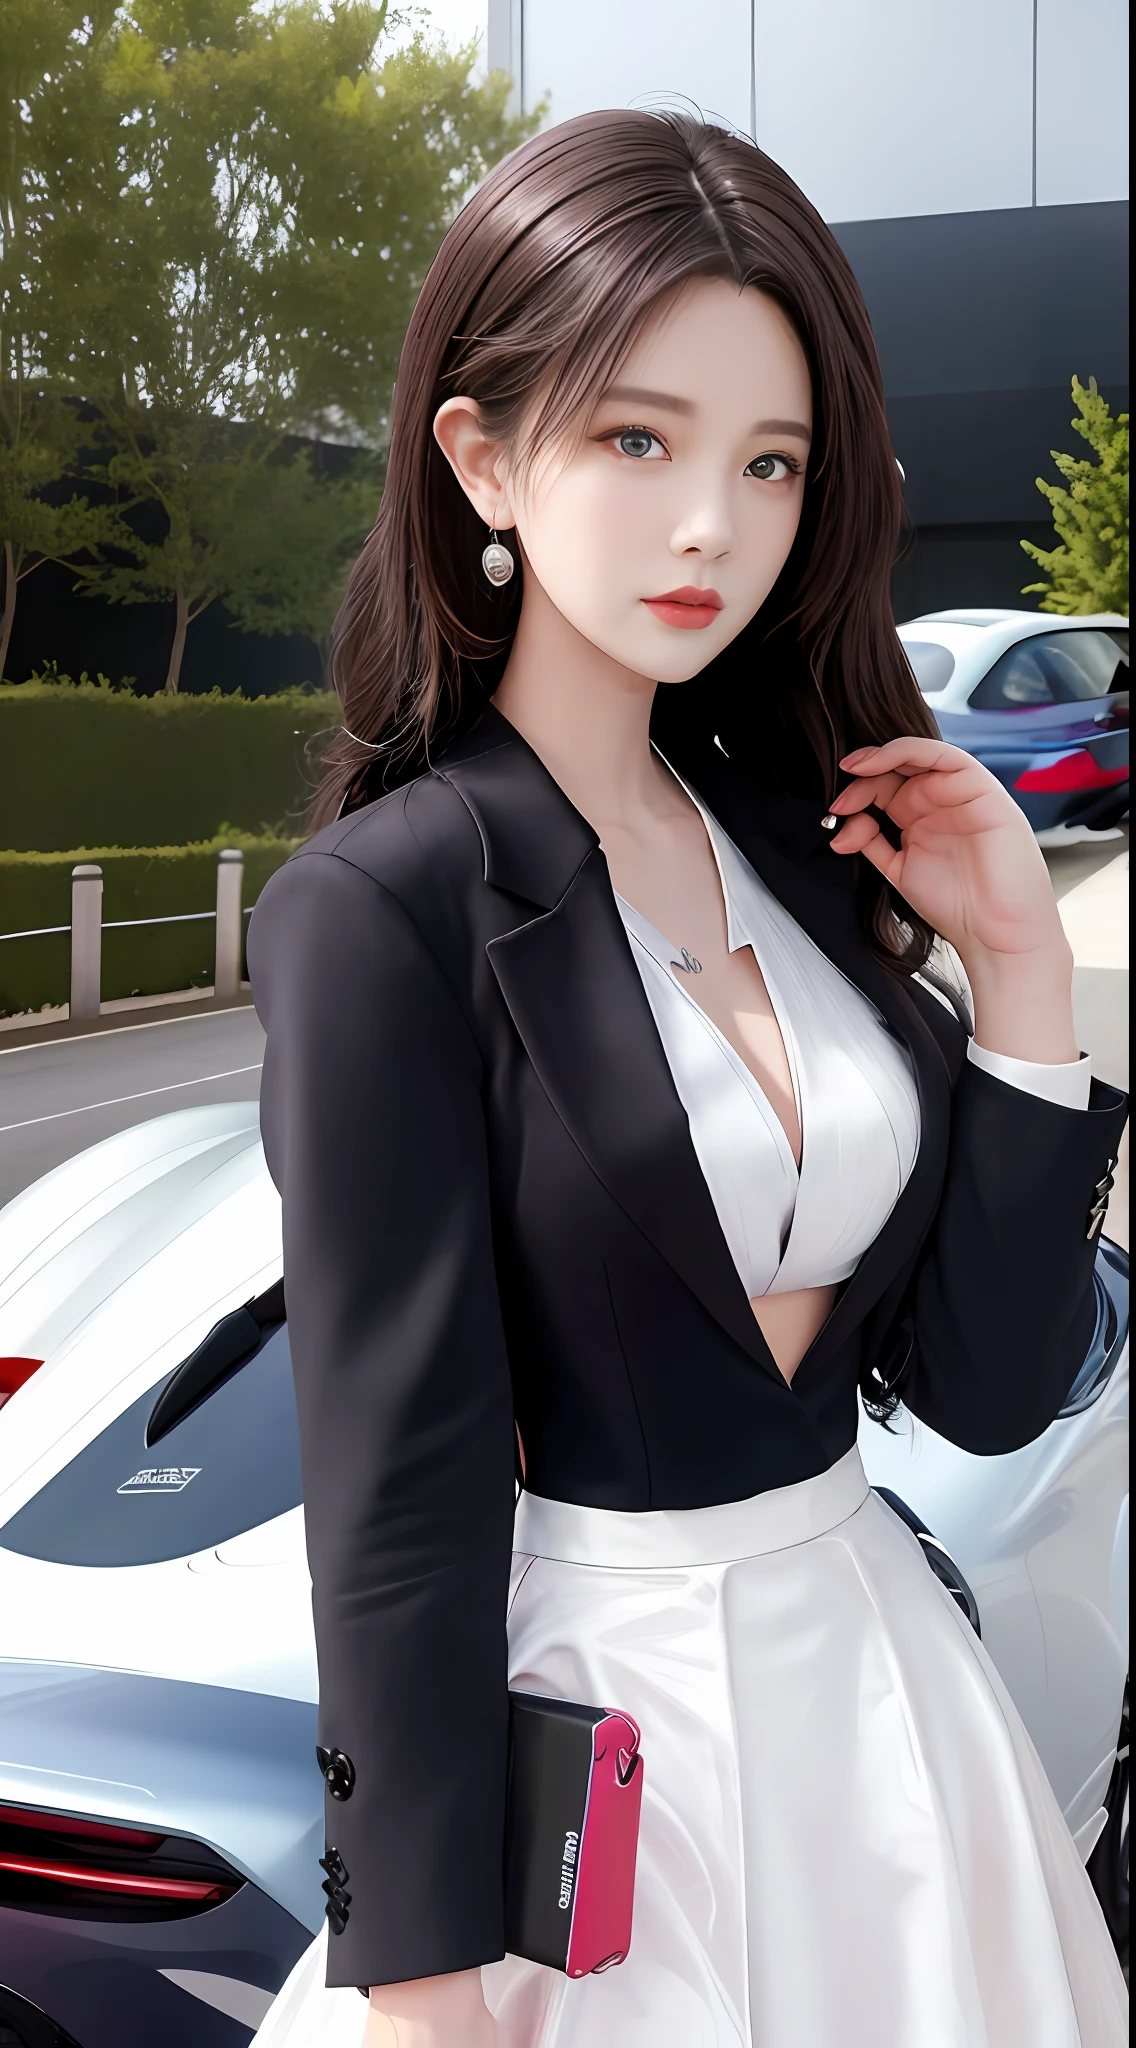 （Porsche sports car in background），best qualtiy， tmasterpiece， 1girll， beauitful face， （photograph realistic：1.3）， edge lit， （highdetailskin：1.2）， 8K  UHD， digital SLR camera， high high quality， A high resolution， 4k， 8k， bokeh， absurderes， Optimal proportions of four fingers and one thumb， （realisticlying：1.3）， Cute 1girl， Wearing a pink formal blazer， mediuml breasts， 【（white dresses）】，